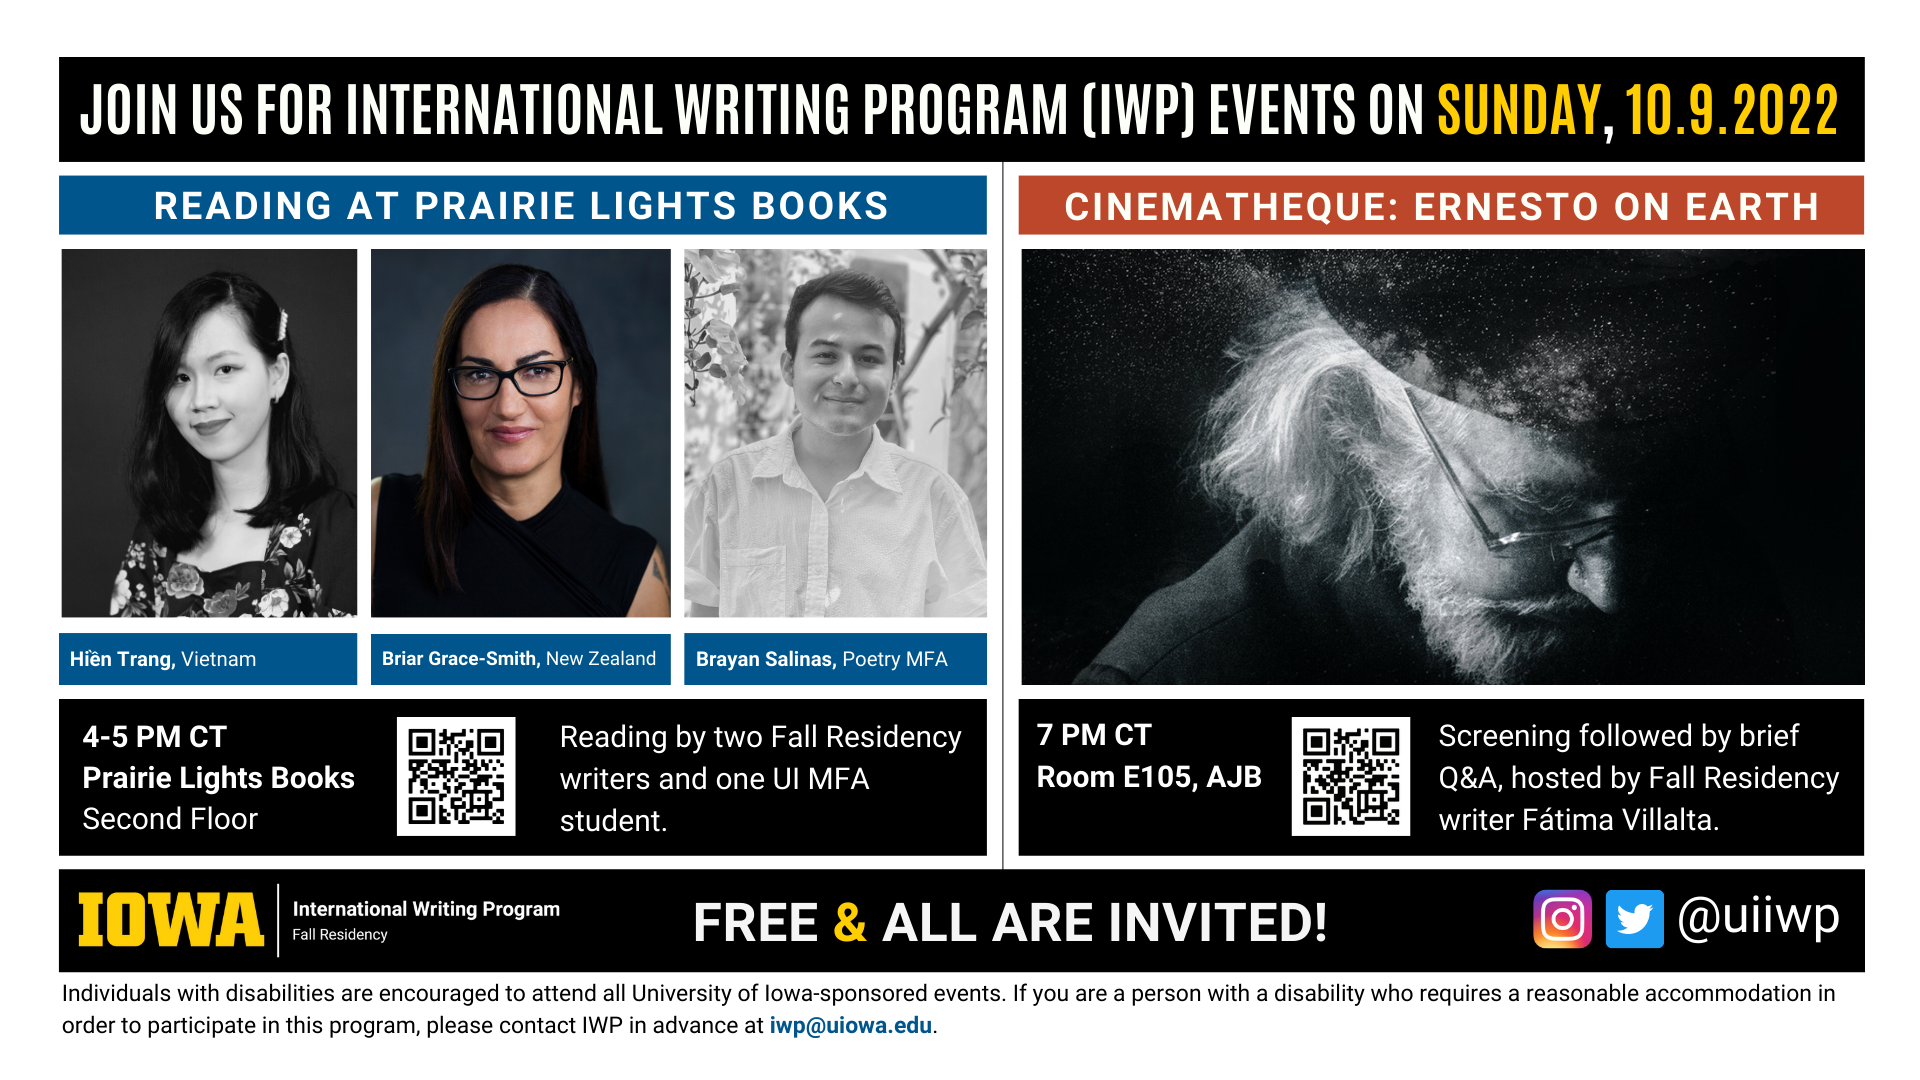 An image with two halves, each advertising one event. The image as a whole is labeled "Join us for International Writing Program (IWP) Events on Sunday, 10.9.2022. The left half left of the image is labeled "Reading at Prairie Lights Books." There are portraits of three writers (named below) and the following text: "Hien Trang, Vietnam. Briar Grace-Smith, New Zealand. Brayan Salinas, Poetry MFA." 4-5 PM CT Prairie Lights Books, Second Floor. Reading by two Fall Residency writers and one UI MFA student." The right half of the image is labeled "Cinematheque: Ernesto on Earth." Below that heading there is a promotional image for the film, featuring a somber looking older man looking down in a stark black and white image. The following text appears below: "7 PM CT, Room E105 AJB. Screening followed by brief Q&A, hosted by Fall Residency writer Fátima Villalta." Below that text there are the IWP Fall Residency logo, the Instagram and Twitter handle @uiiwp, and a note that the event is “Free & All Are Invited.” The following text is at the bottom of the image: "Individuals with disabilities are encouraged to attend all University of Iowa-sponsored events. If you are a person with a disability who requires a reasonable accommodation in order to participate in this program, please contact IWP in advance at iwp@uiowa.edu."